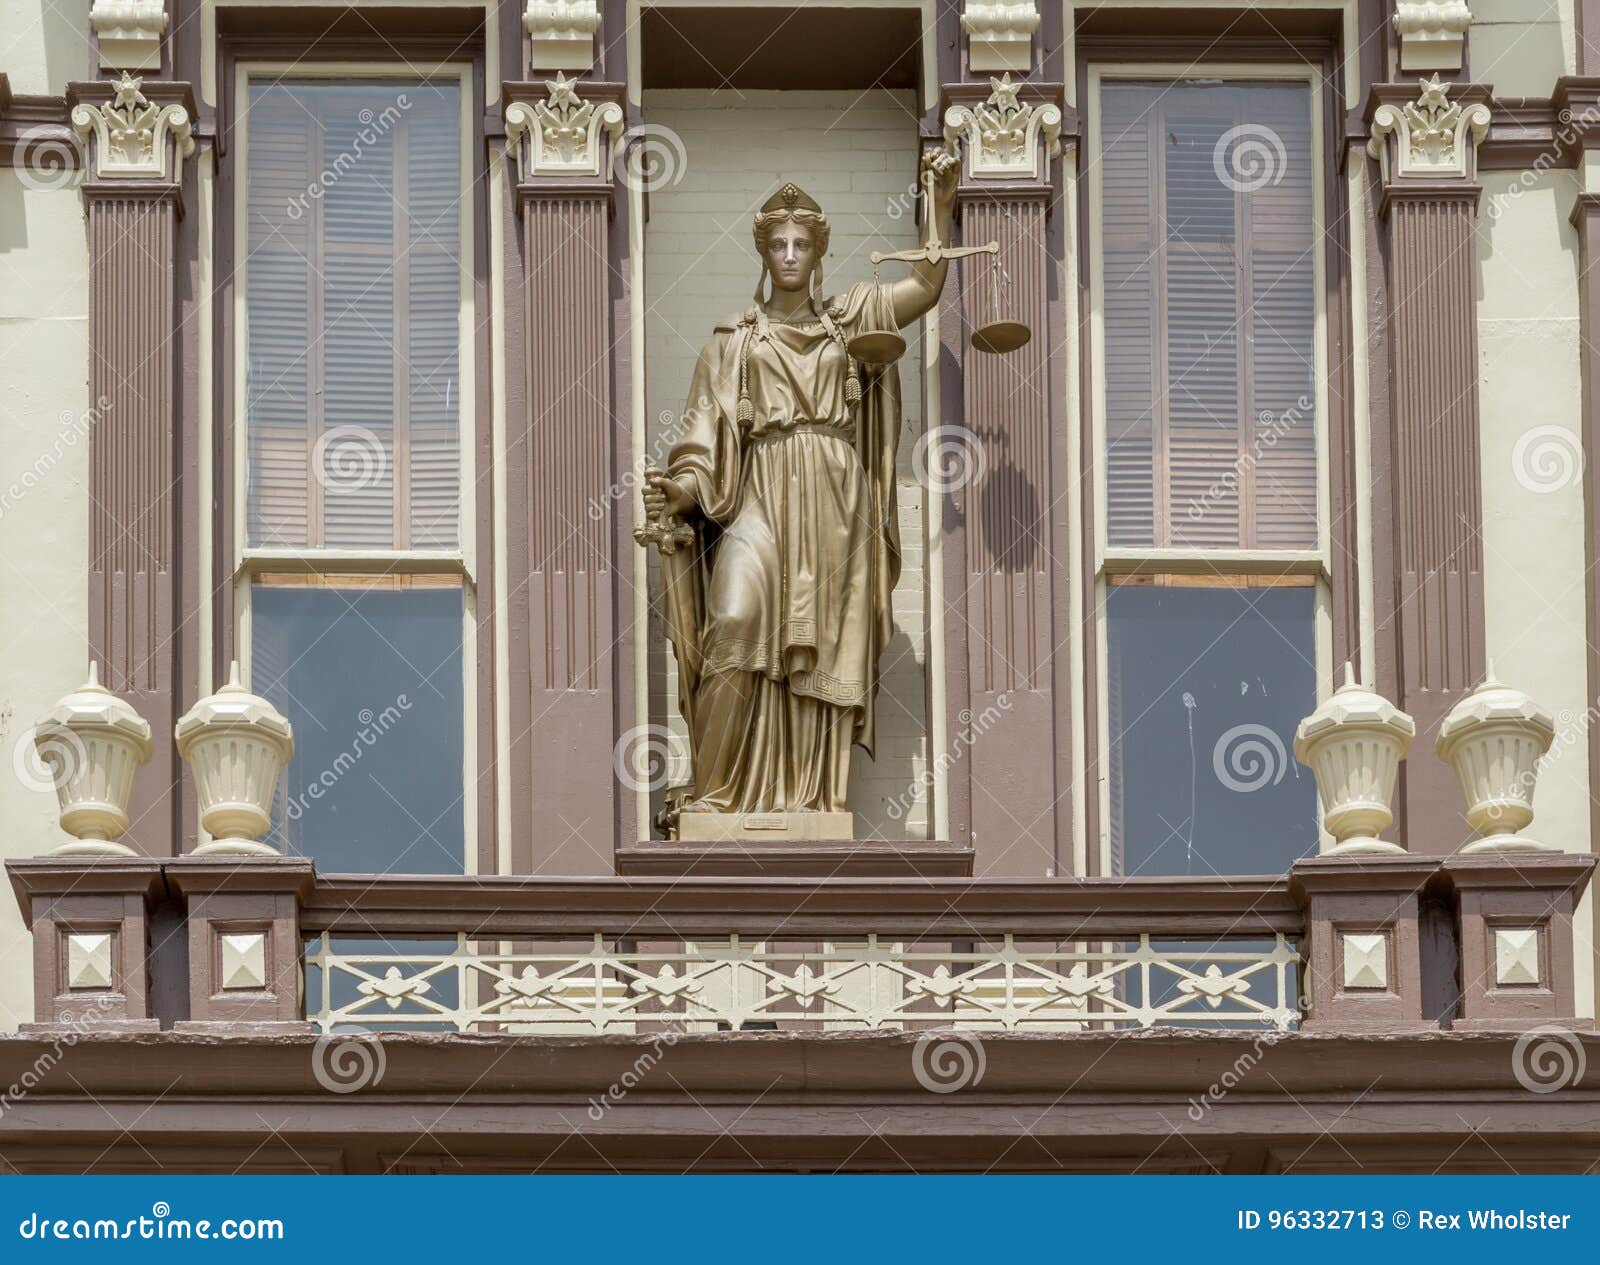 scales of justice at storey county courthouse